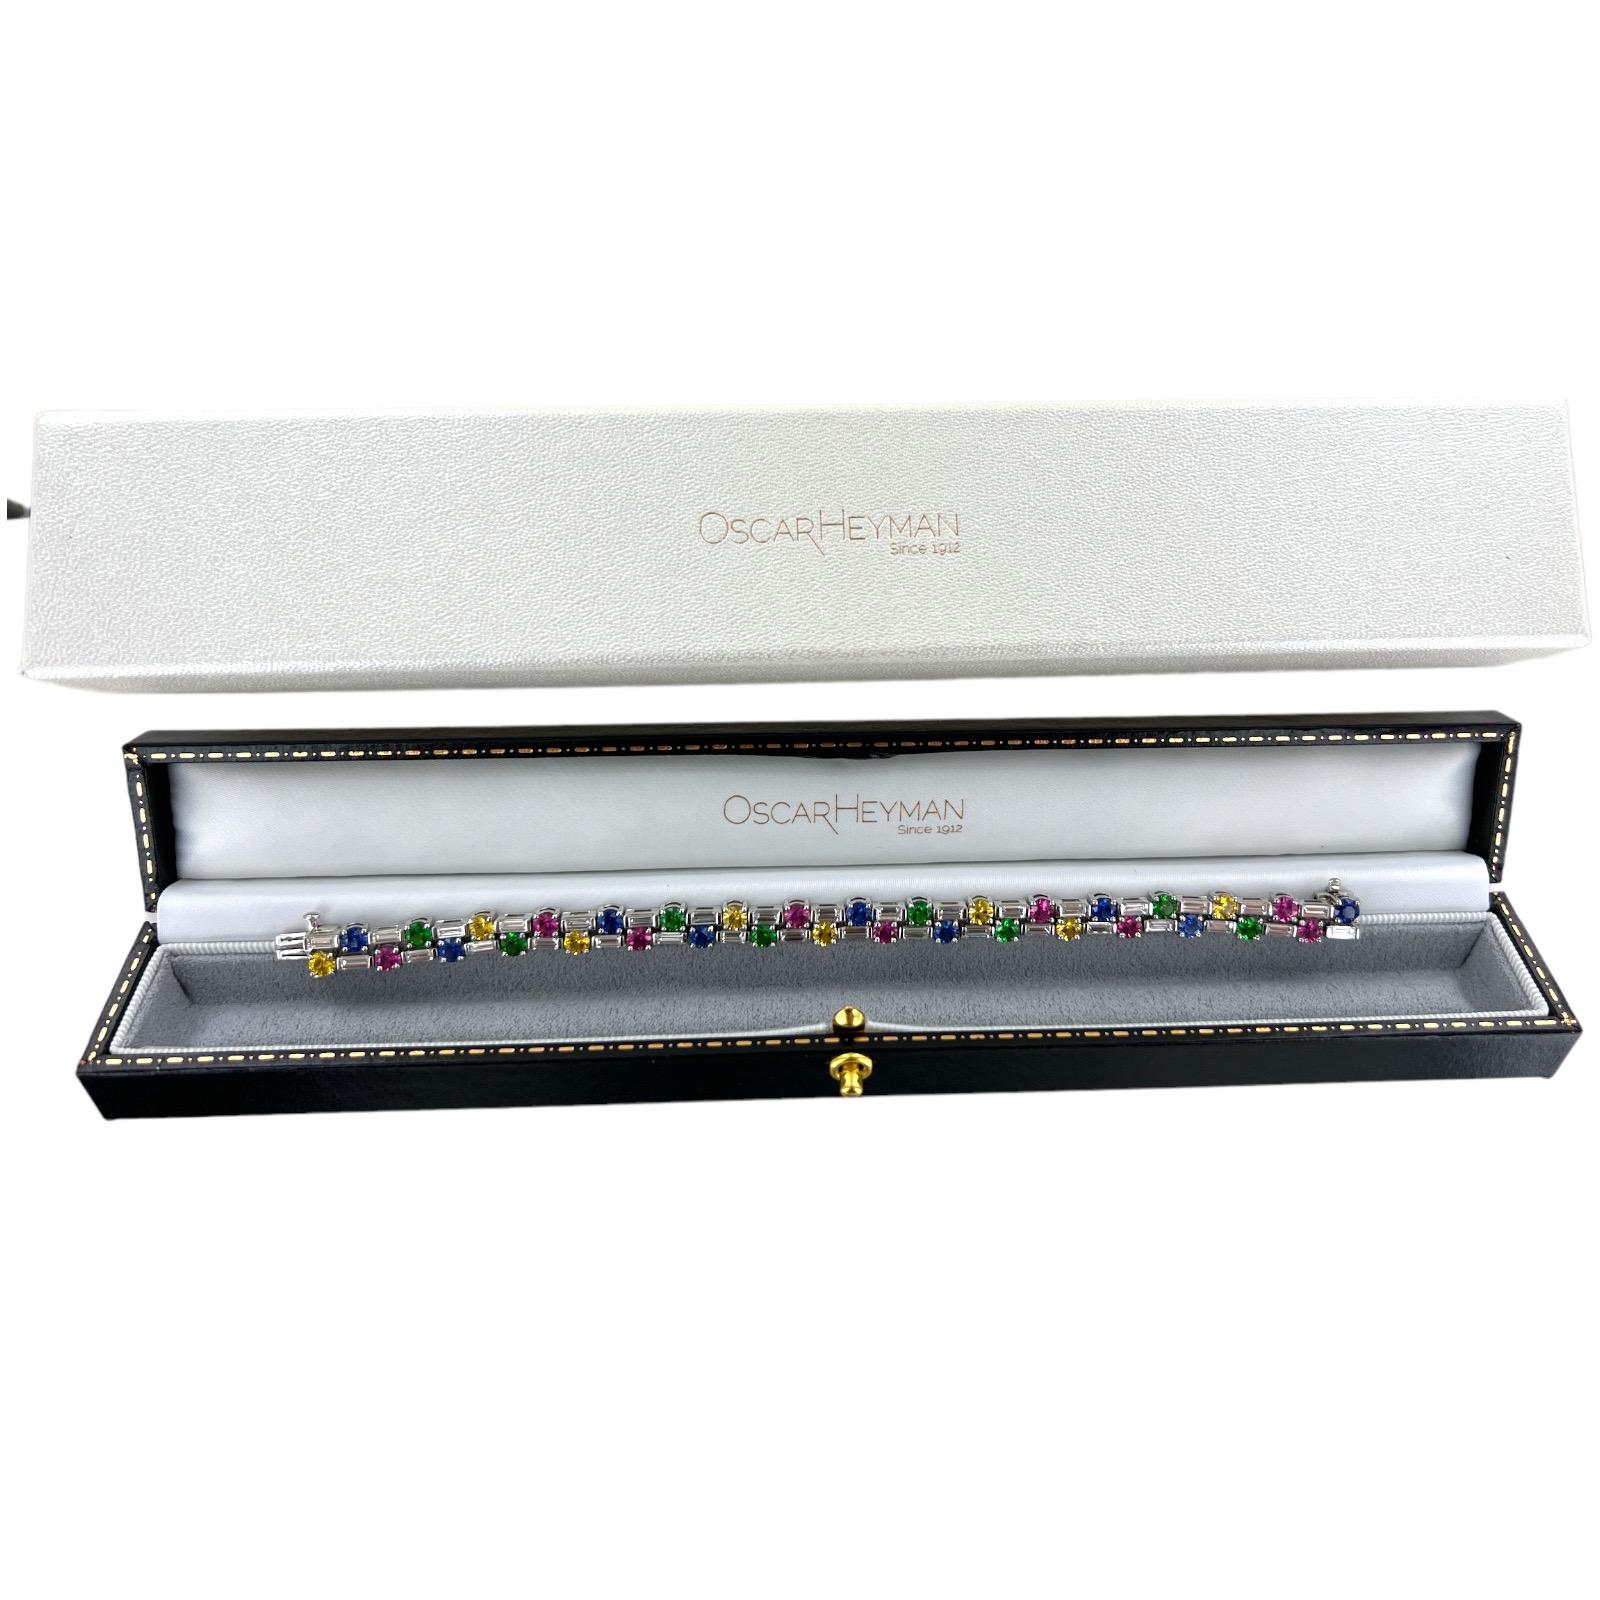 Oscar Heyman's diamond and colorful sapphire bracelet crafted in platinum. The high-end American jeweler is known for his use of color and the bracelet features 34 round colorful sapphires weighing 9.36 CTW and 34 baguette diamonds weighing 4.45